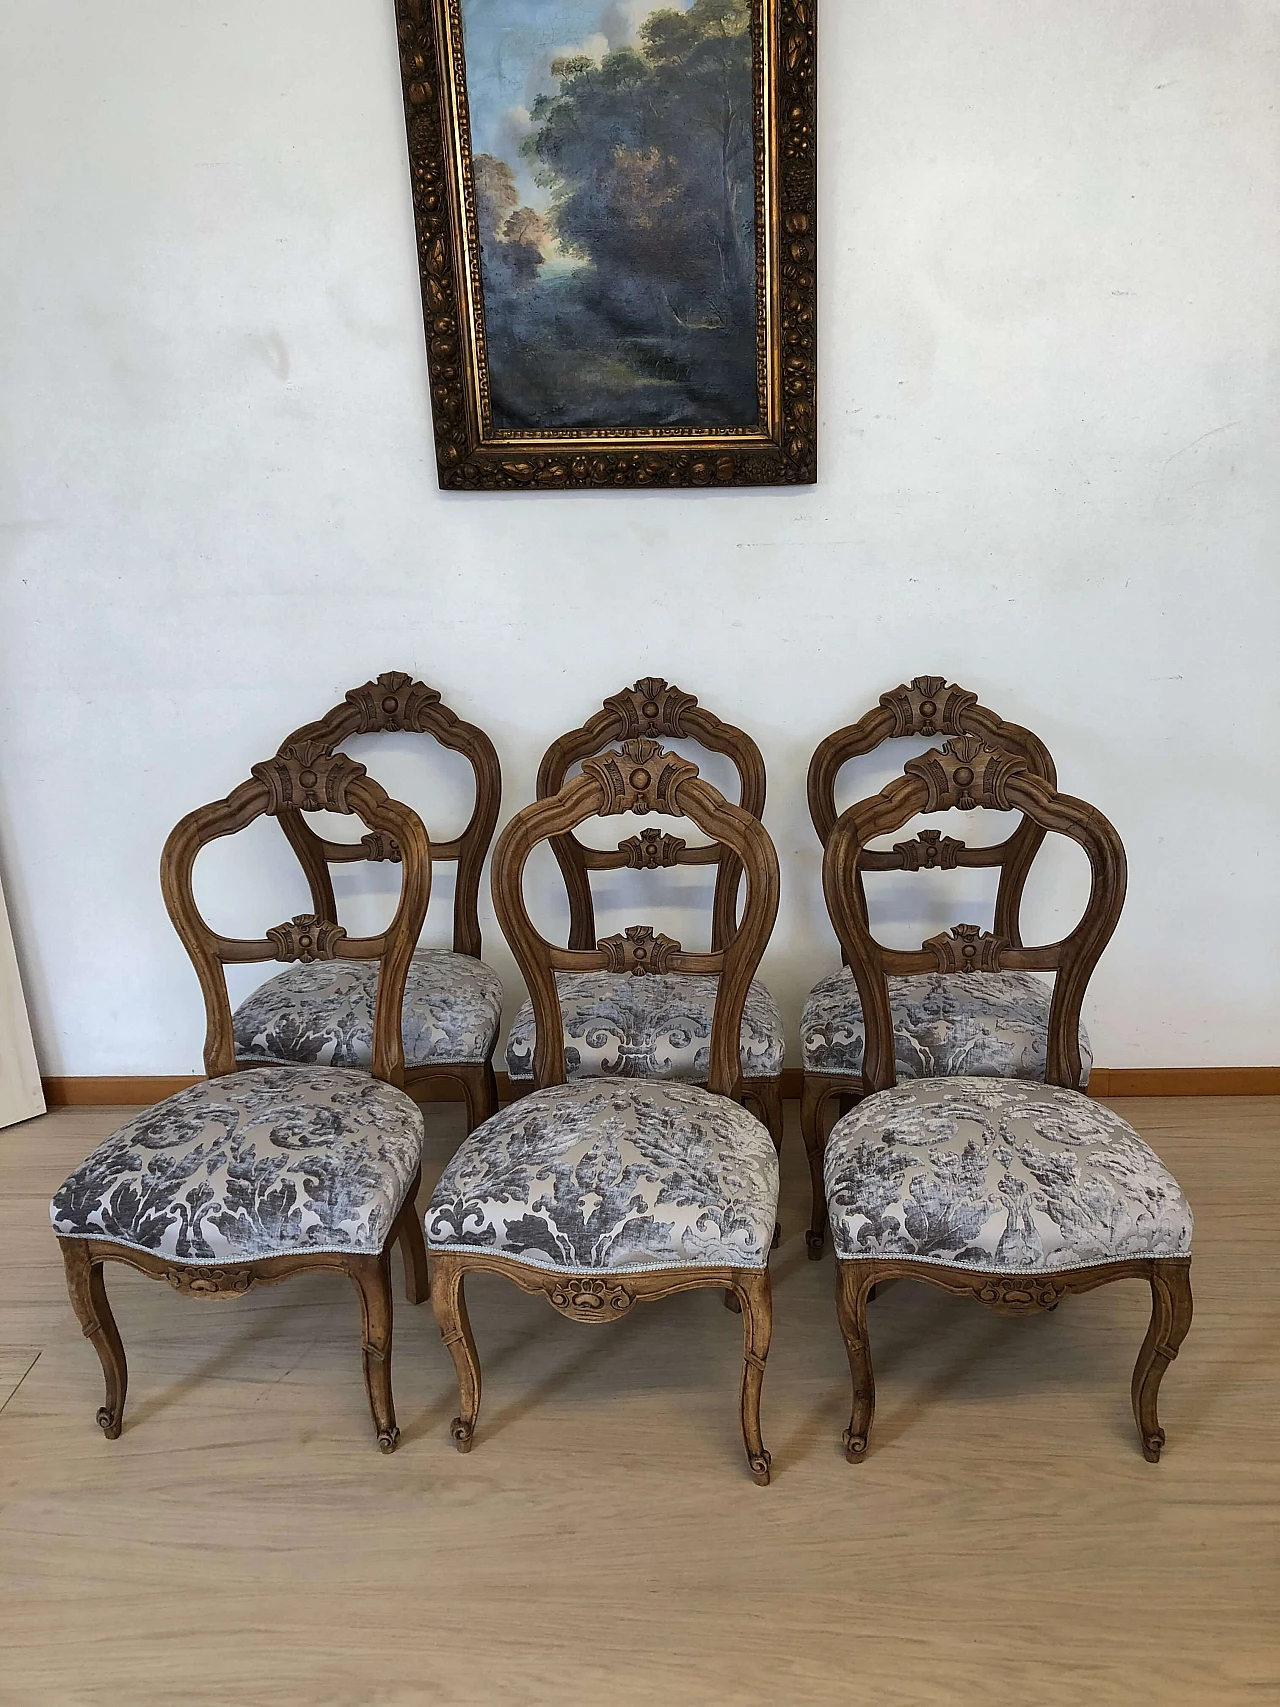 6 Walnut chairs with upholstered seat, 19th century 2